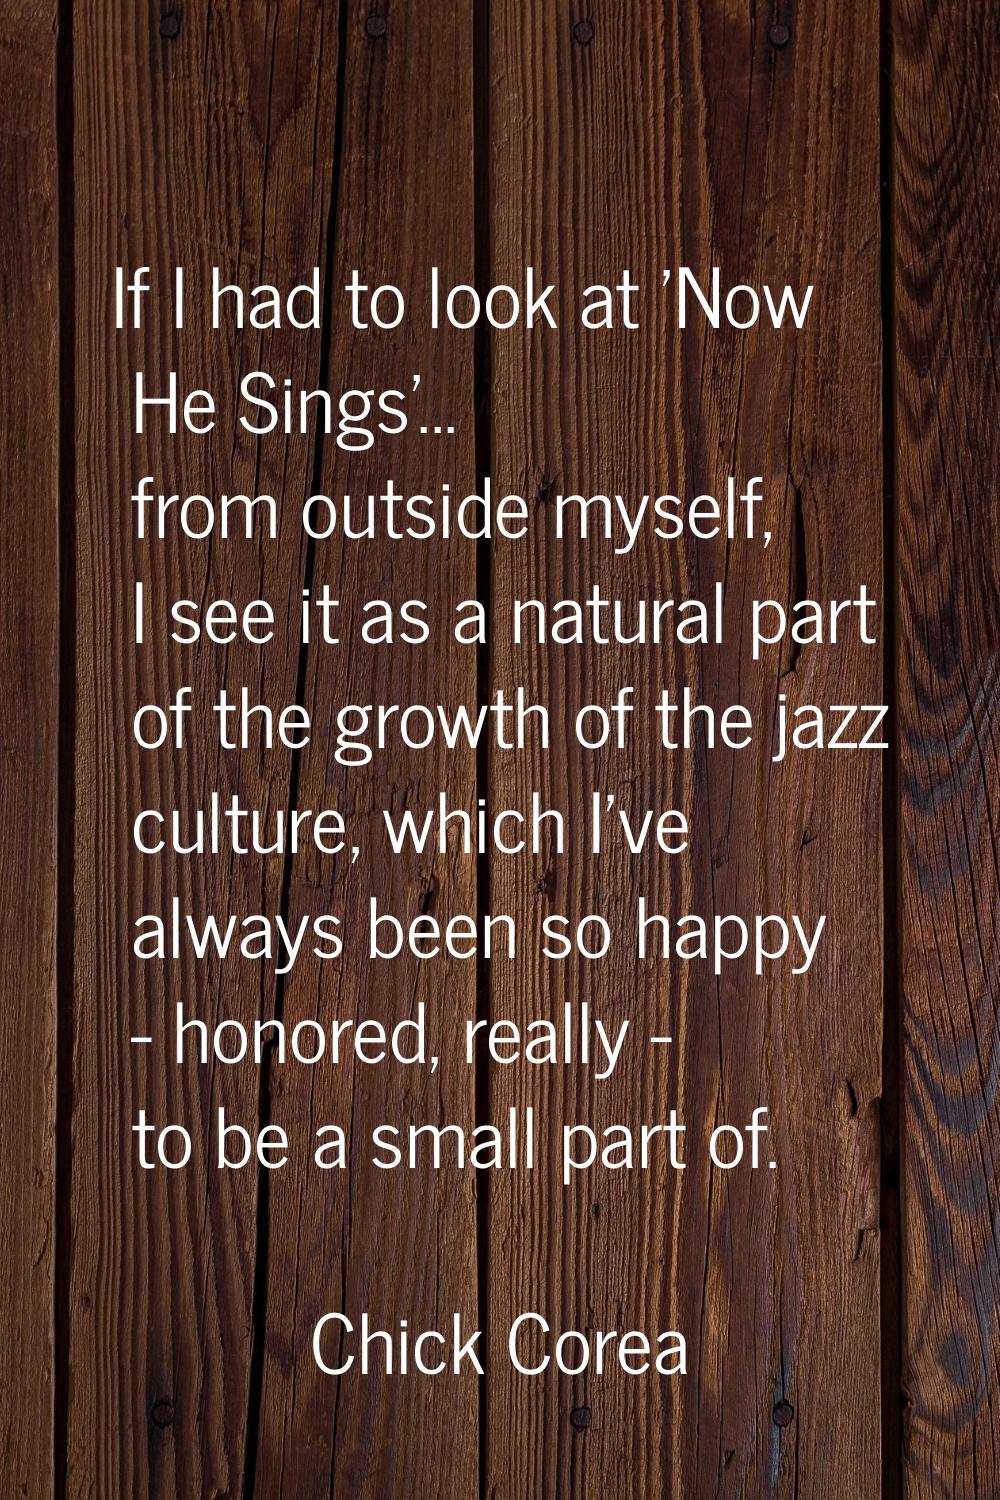 If I had to look at 'Now He Sings'... from outside myself, I see it as a natural part of the growth